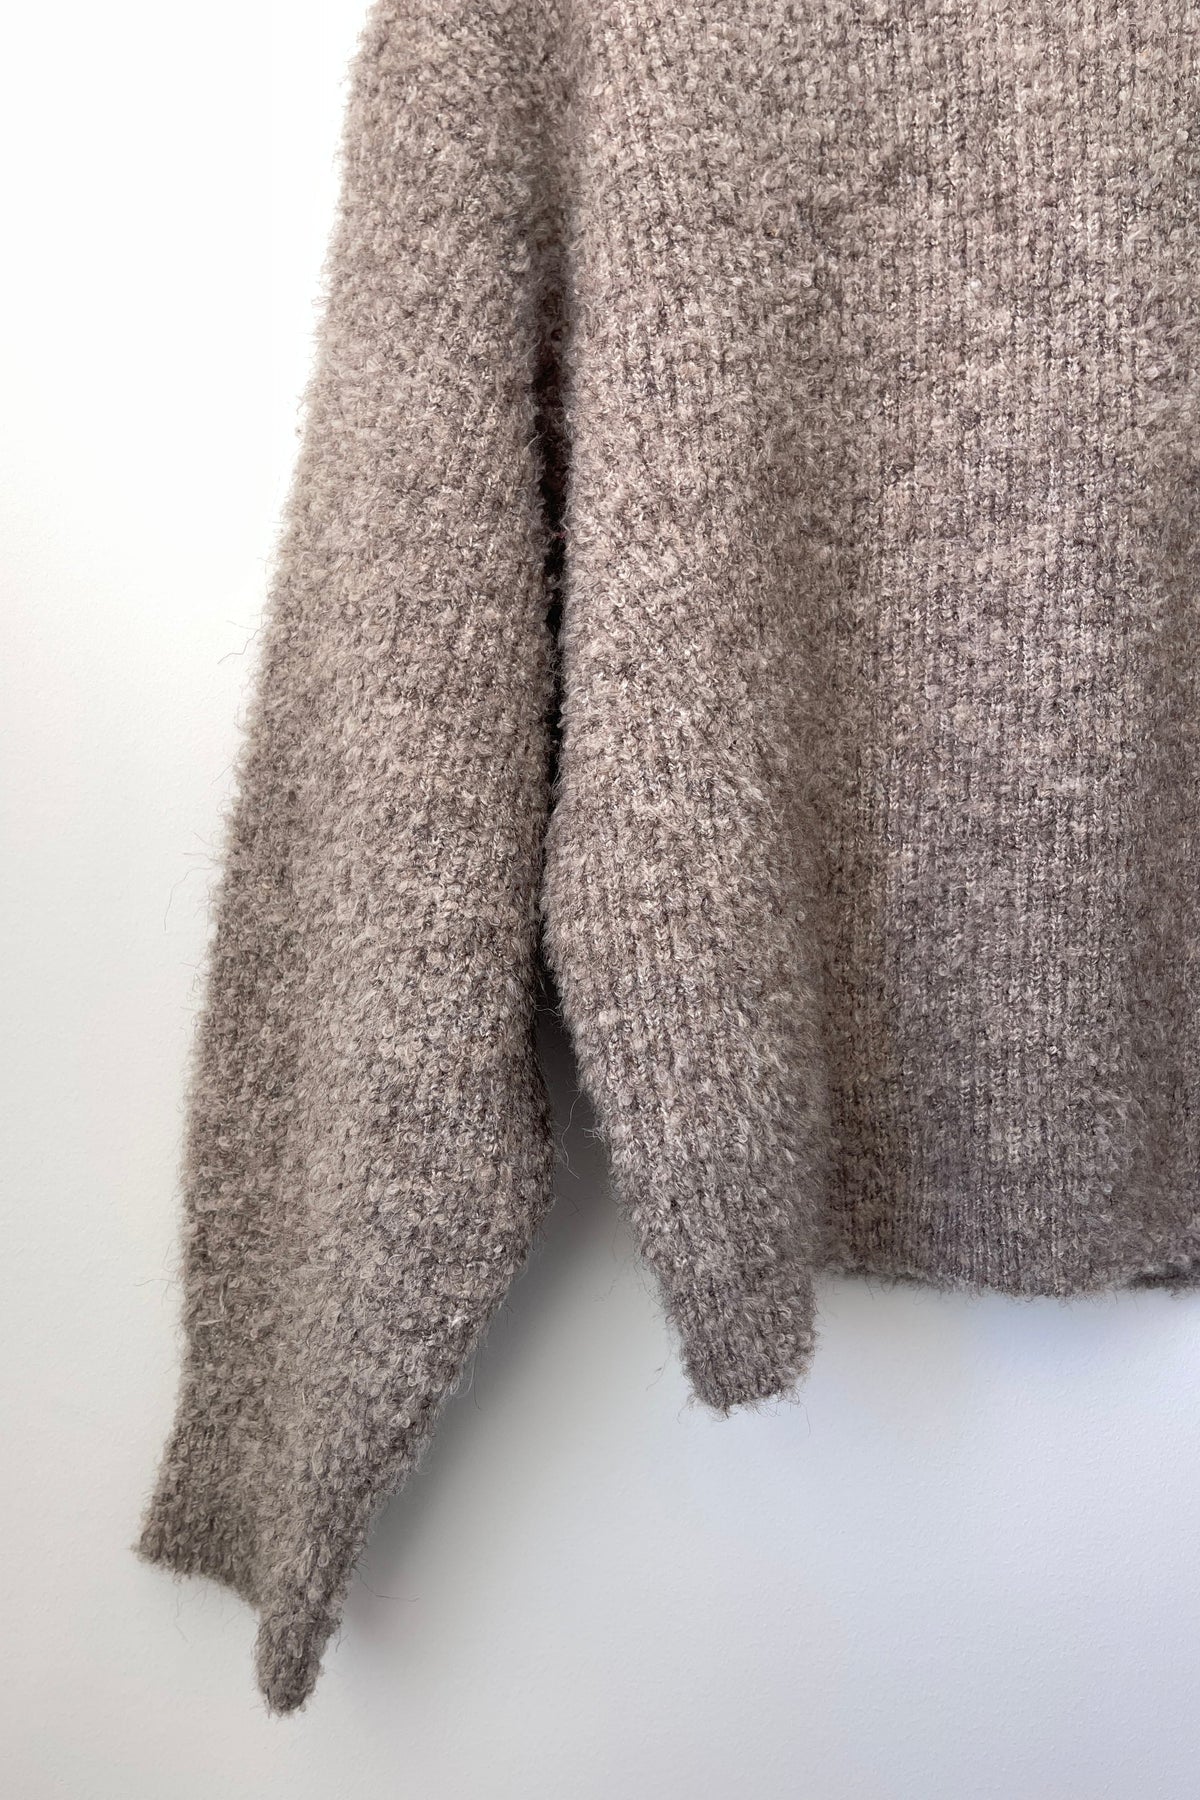 Le Bon Shoppe butter soft thick knit Elise pullover sweater in the colour smoke